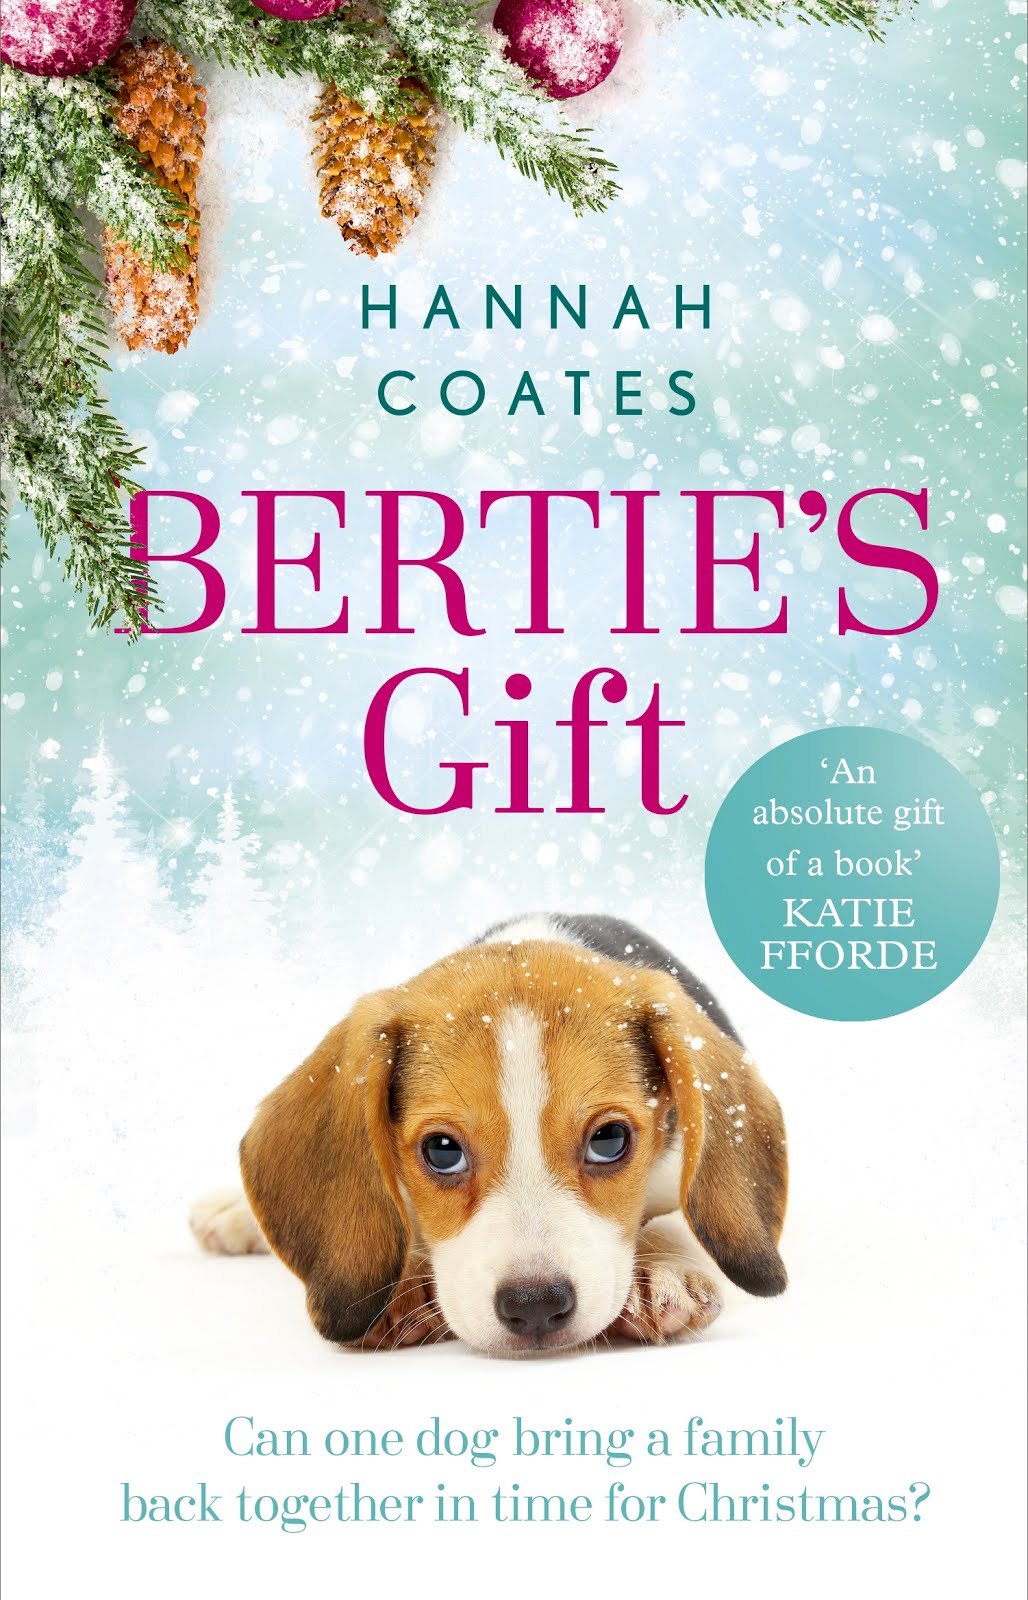 BERTIE'S GIFT, out Nov 2017